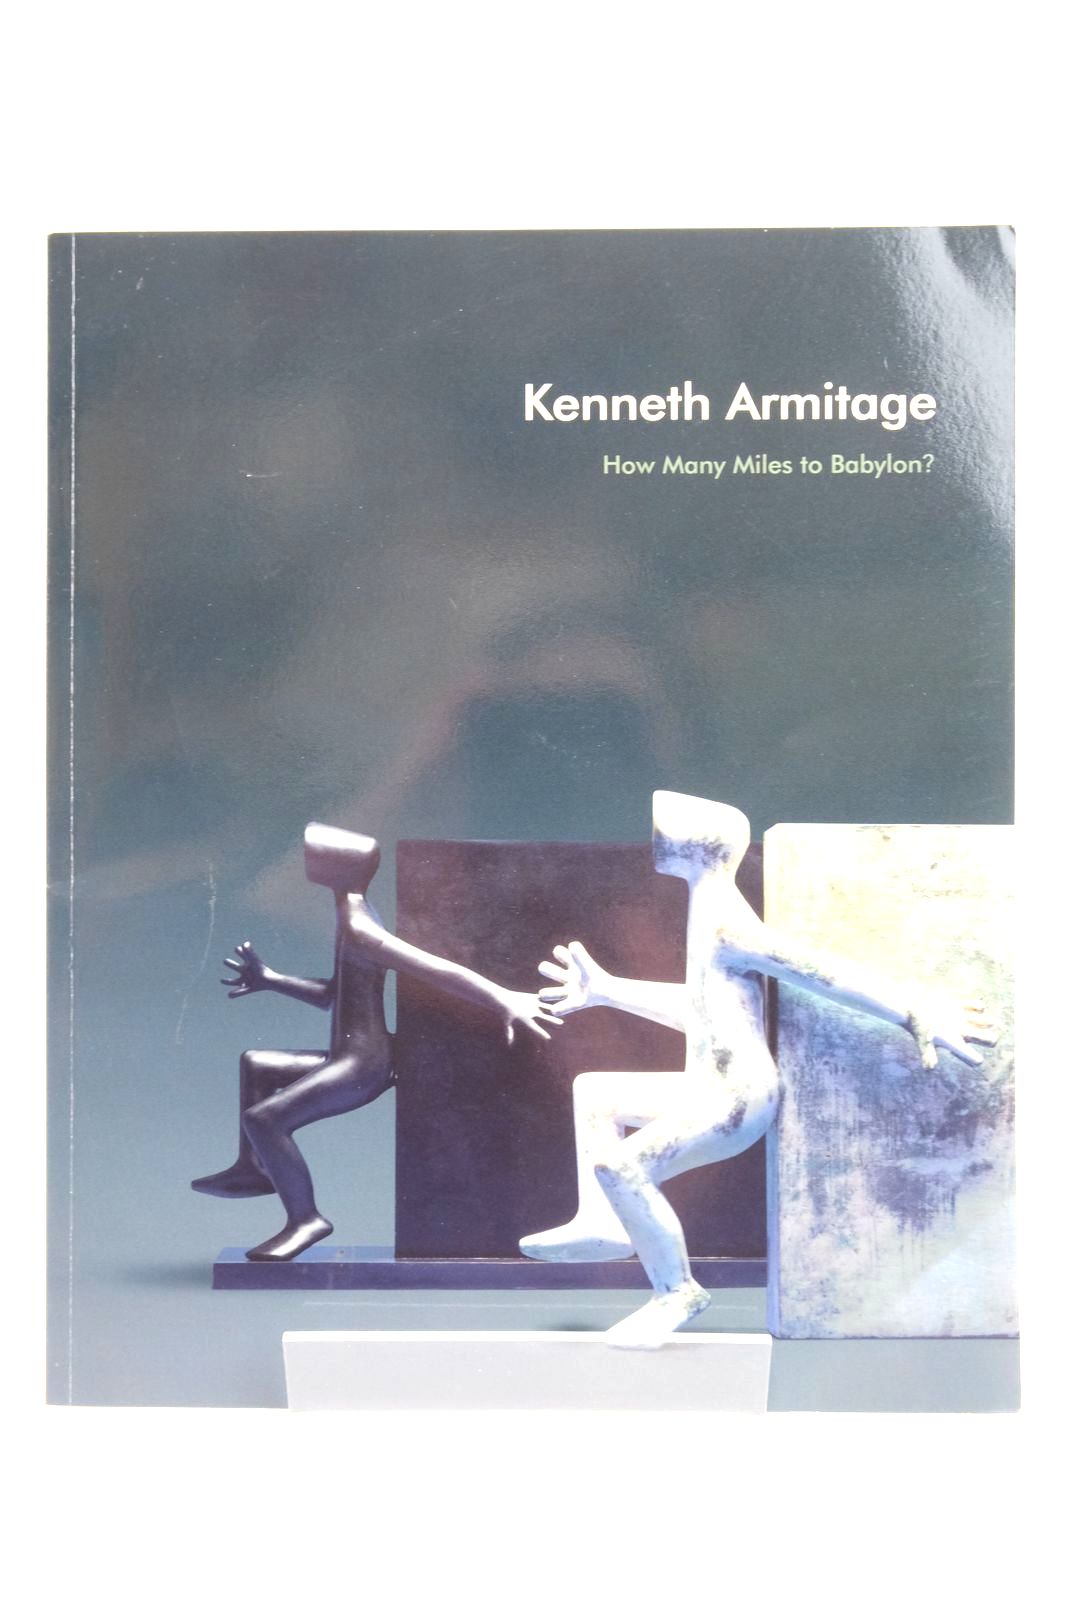 Photo of KENNETH ARMITAGE: HOW MANY MILES TO BABYLON? written by Mallet, Sandy illustrated by Armitage, Kenneth published by Jonathan Clark Fine Art (STOCK CODE: 2136707)  for sale by Stella & Rose's Books